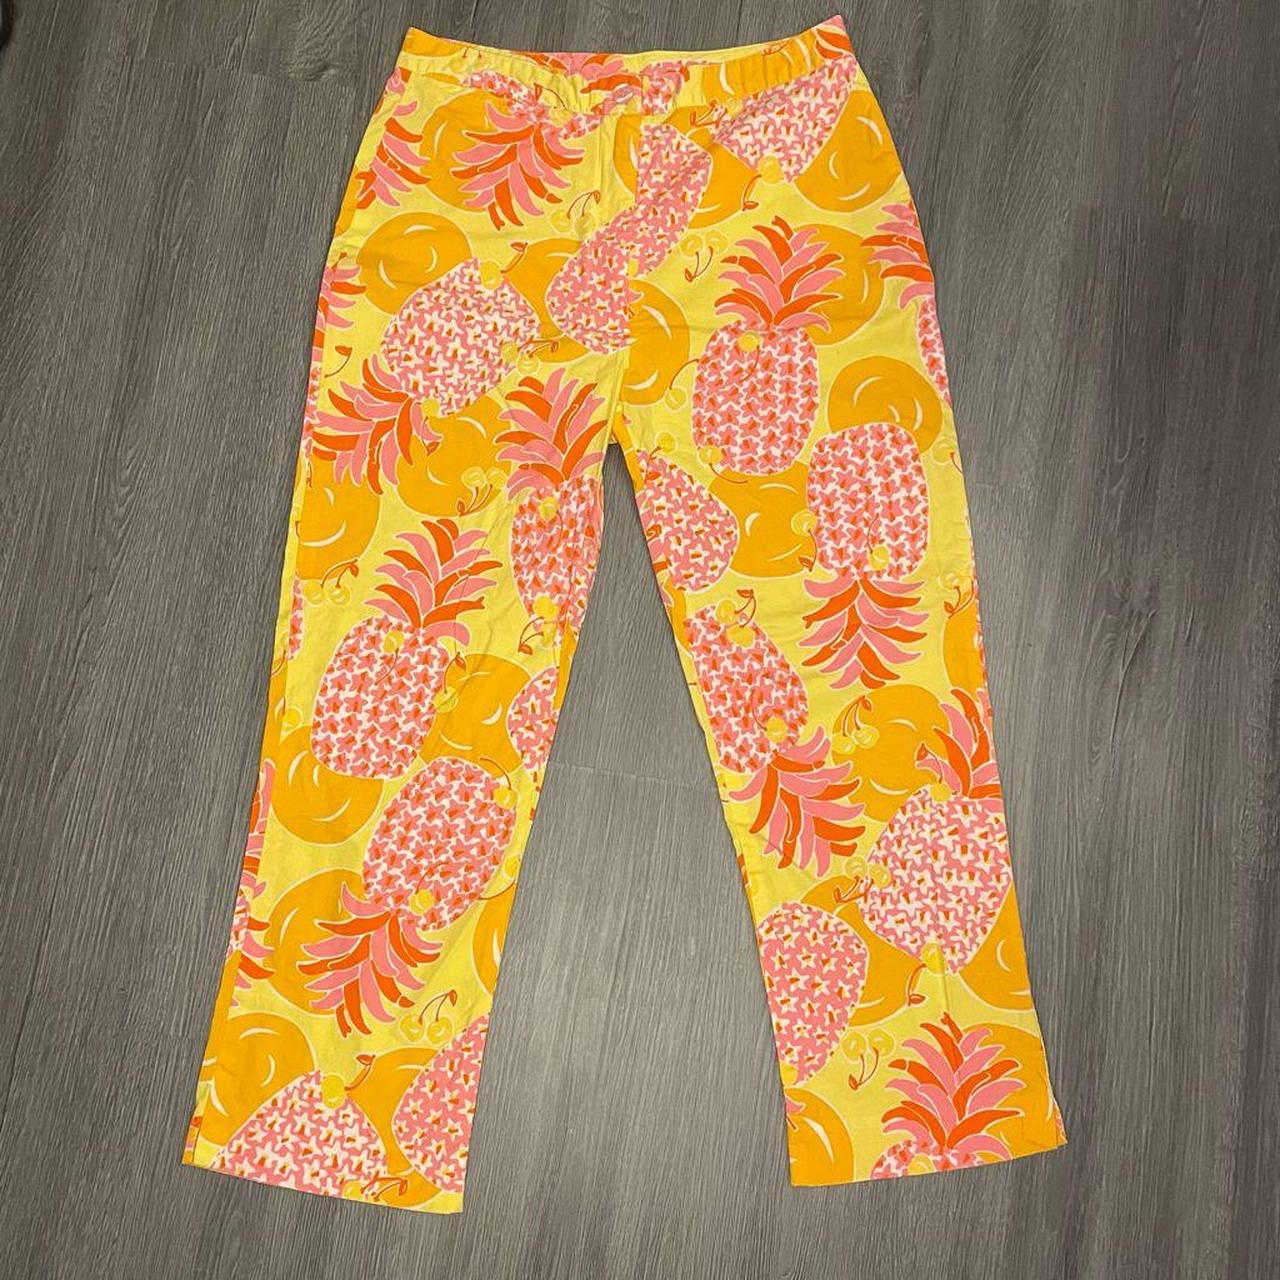 Lilly Pulitzer Women's Pink and Orange Trousers (2)